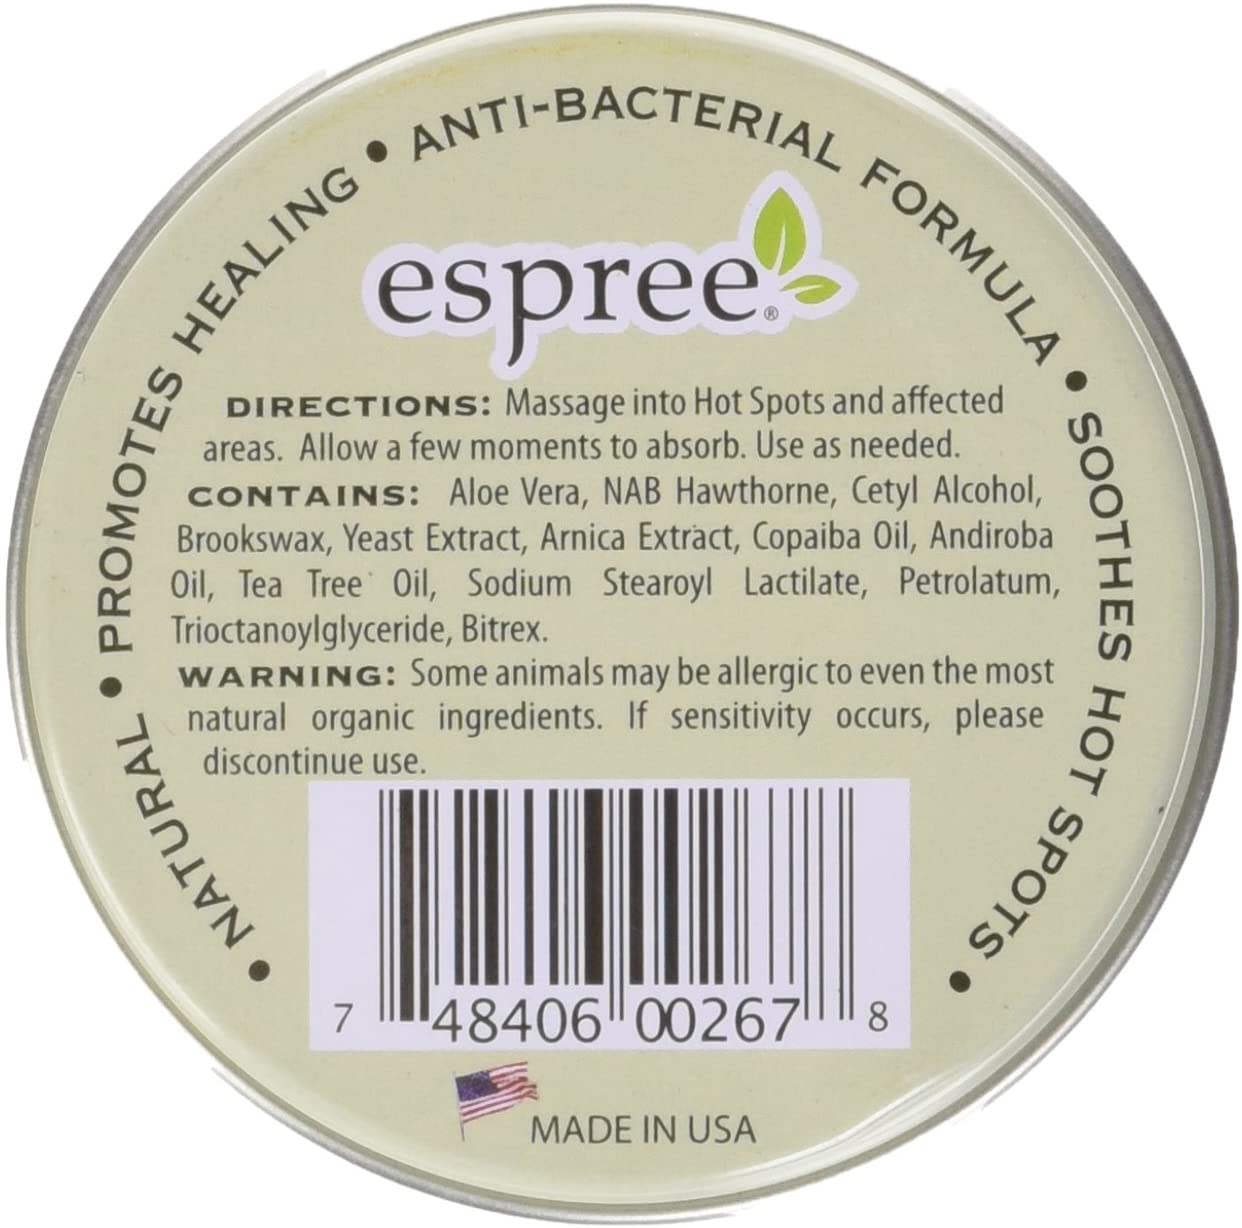 Espree TeaTree Aloe Vera Soothing Cream Healing Hot Spot Back Container